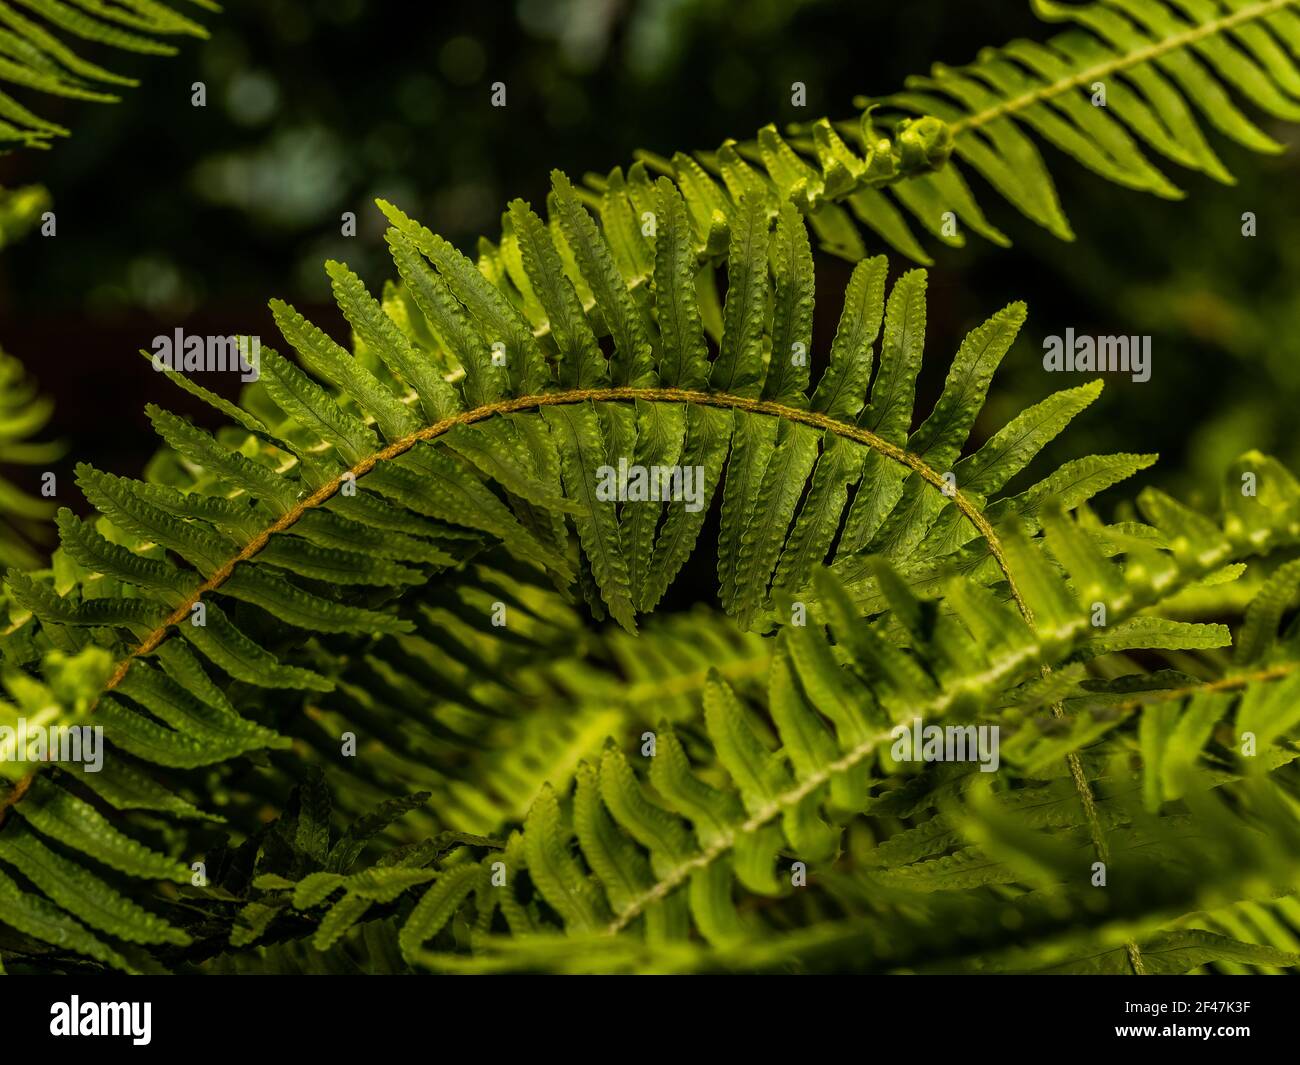 macro Photo of green fern petals. Stock photo plant fern blossomed. Fern on the background of green plants. Stock Photo